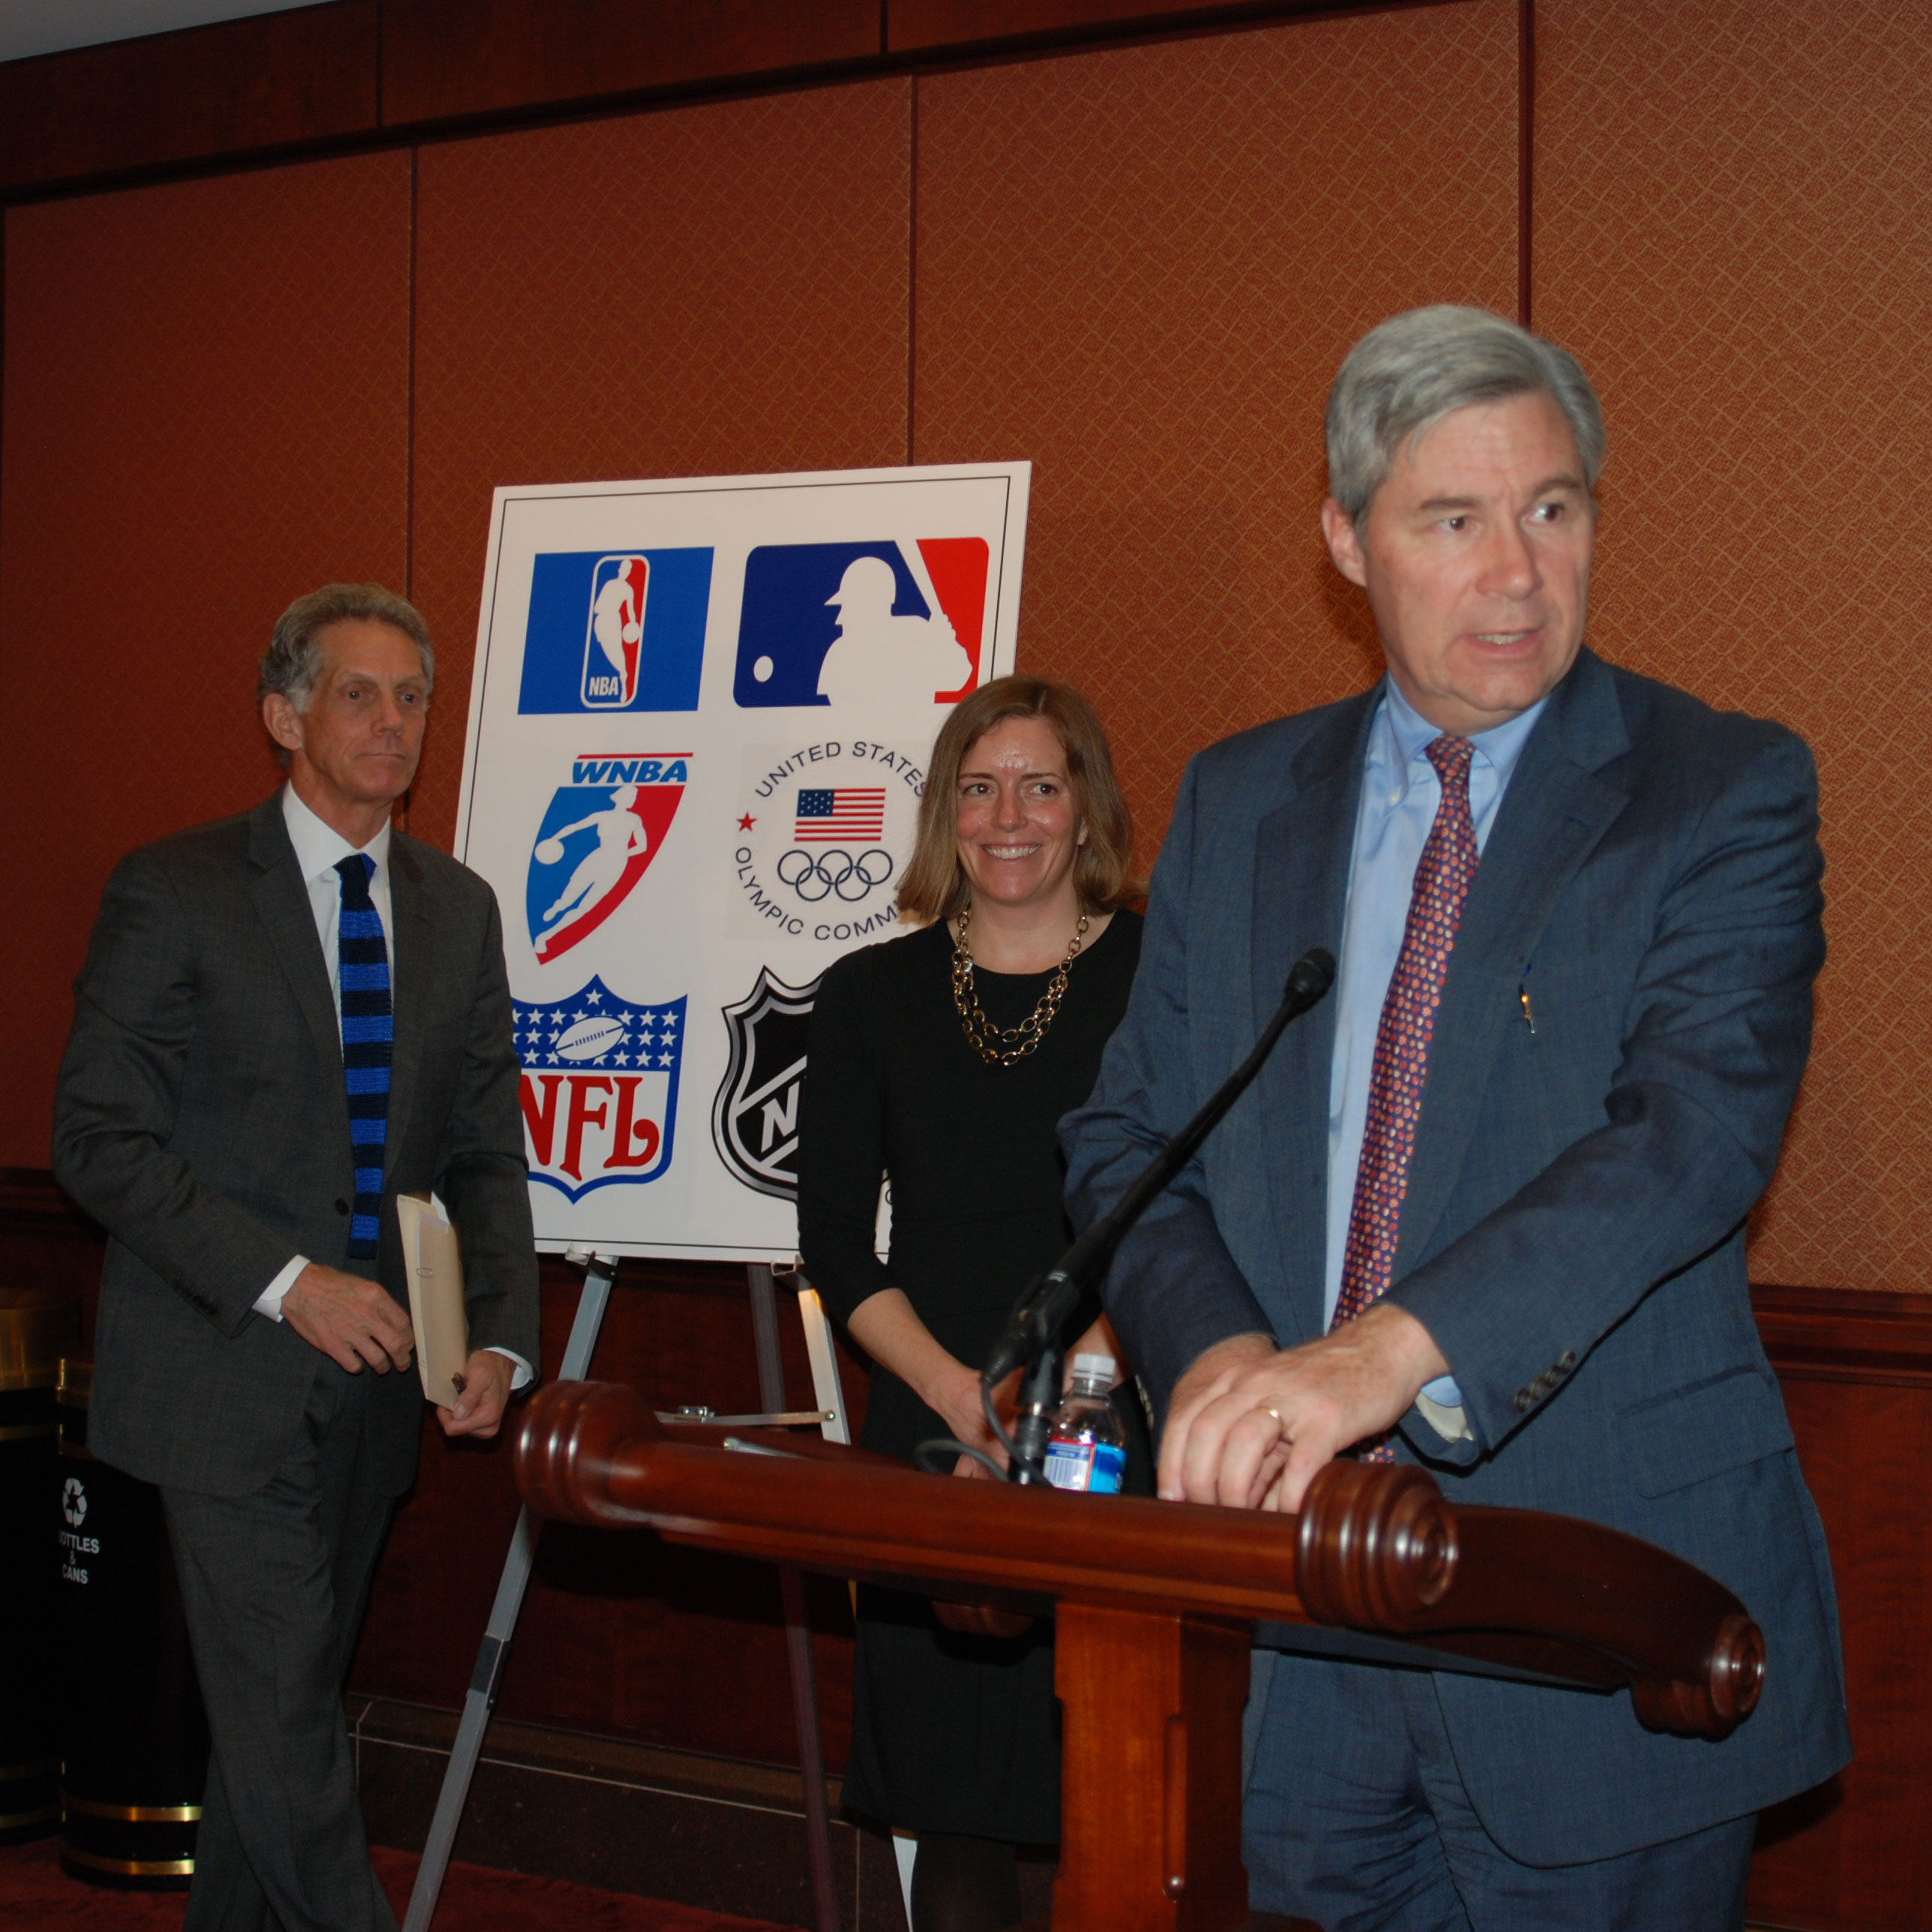 Senator Whitehouse, pictured here with representatives from the MLB and the US Olympic Committee